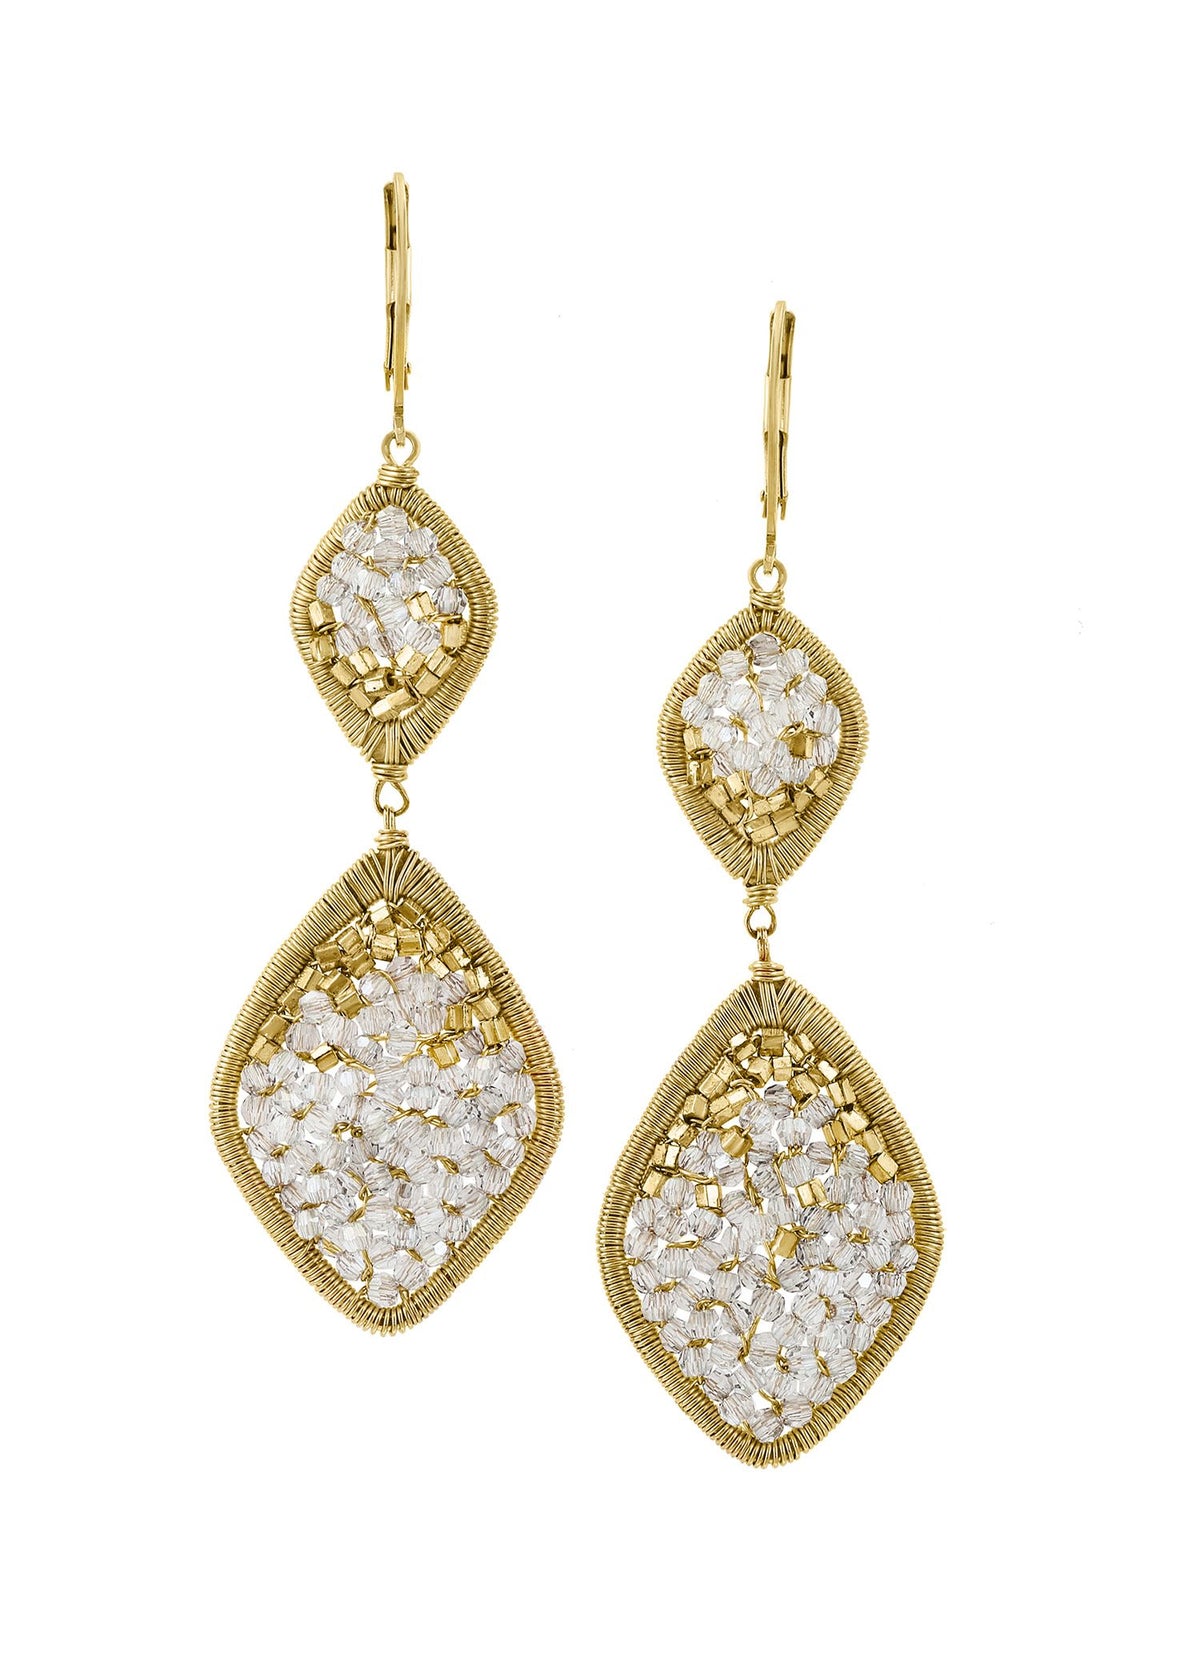 Crystal 14k gold fill Earrings measure 2-1/2&quot; in length (including the levers) and 3/4&quot; in width Handmade in our Los Angeles studio